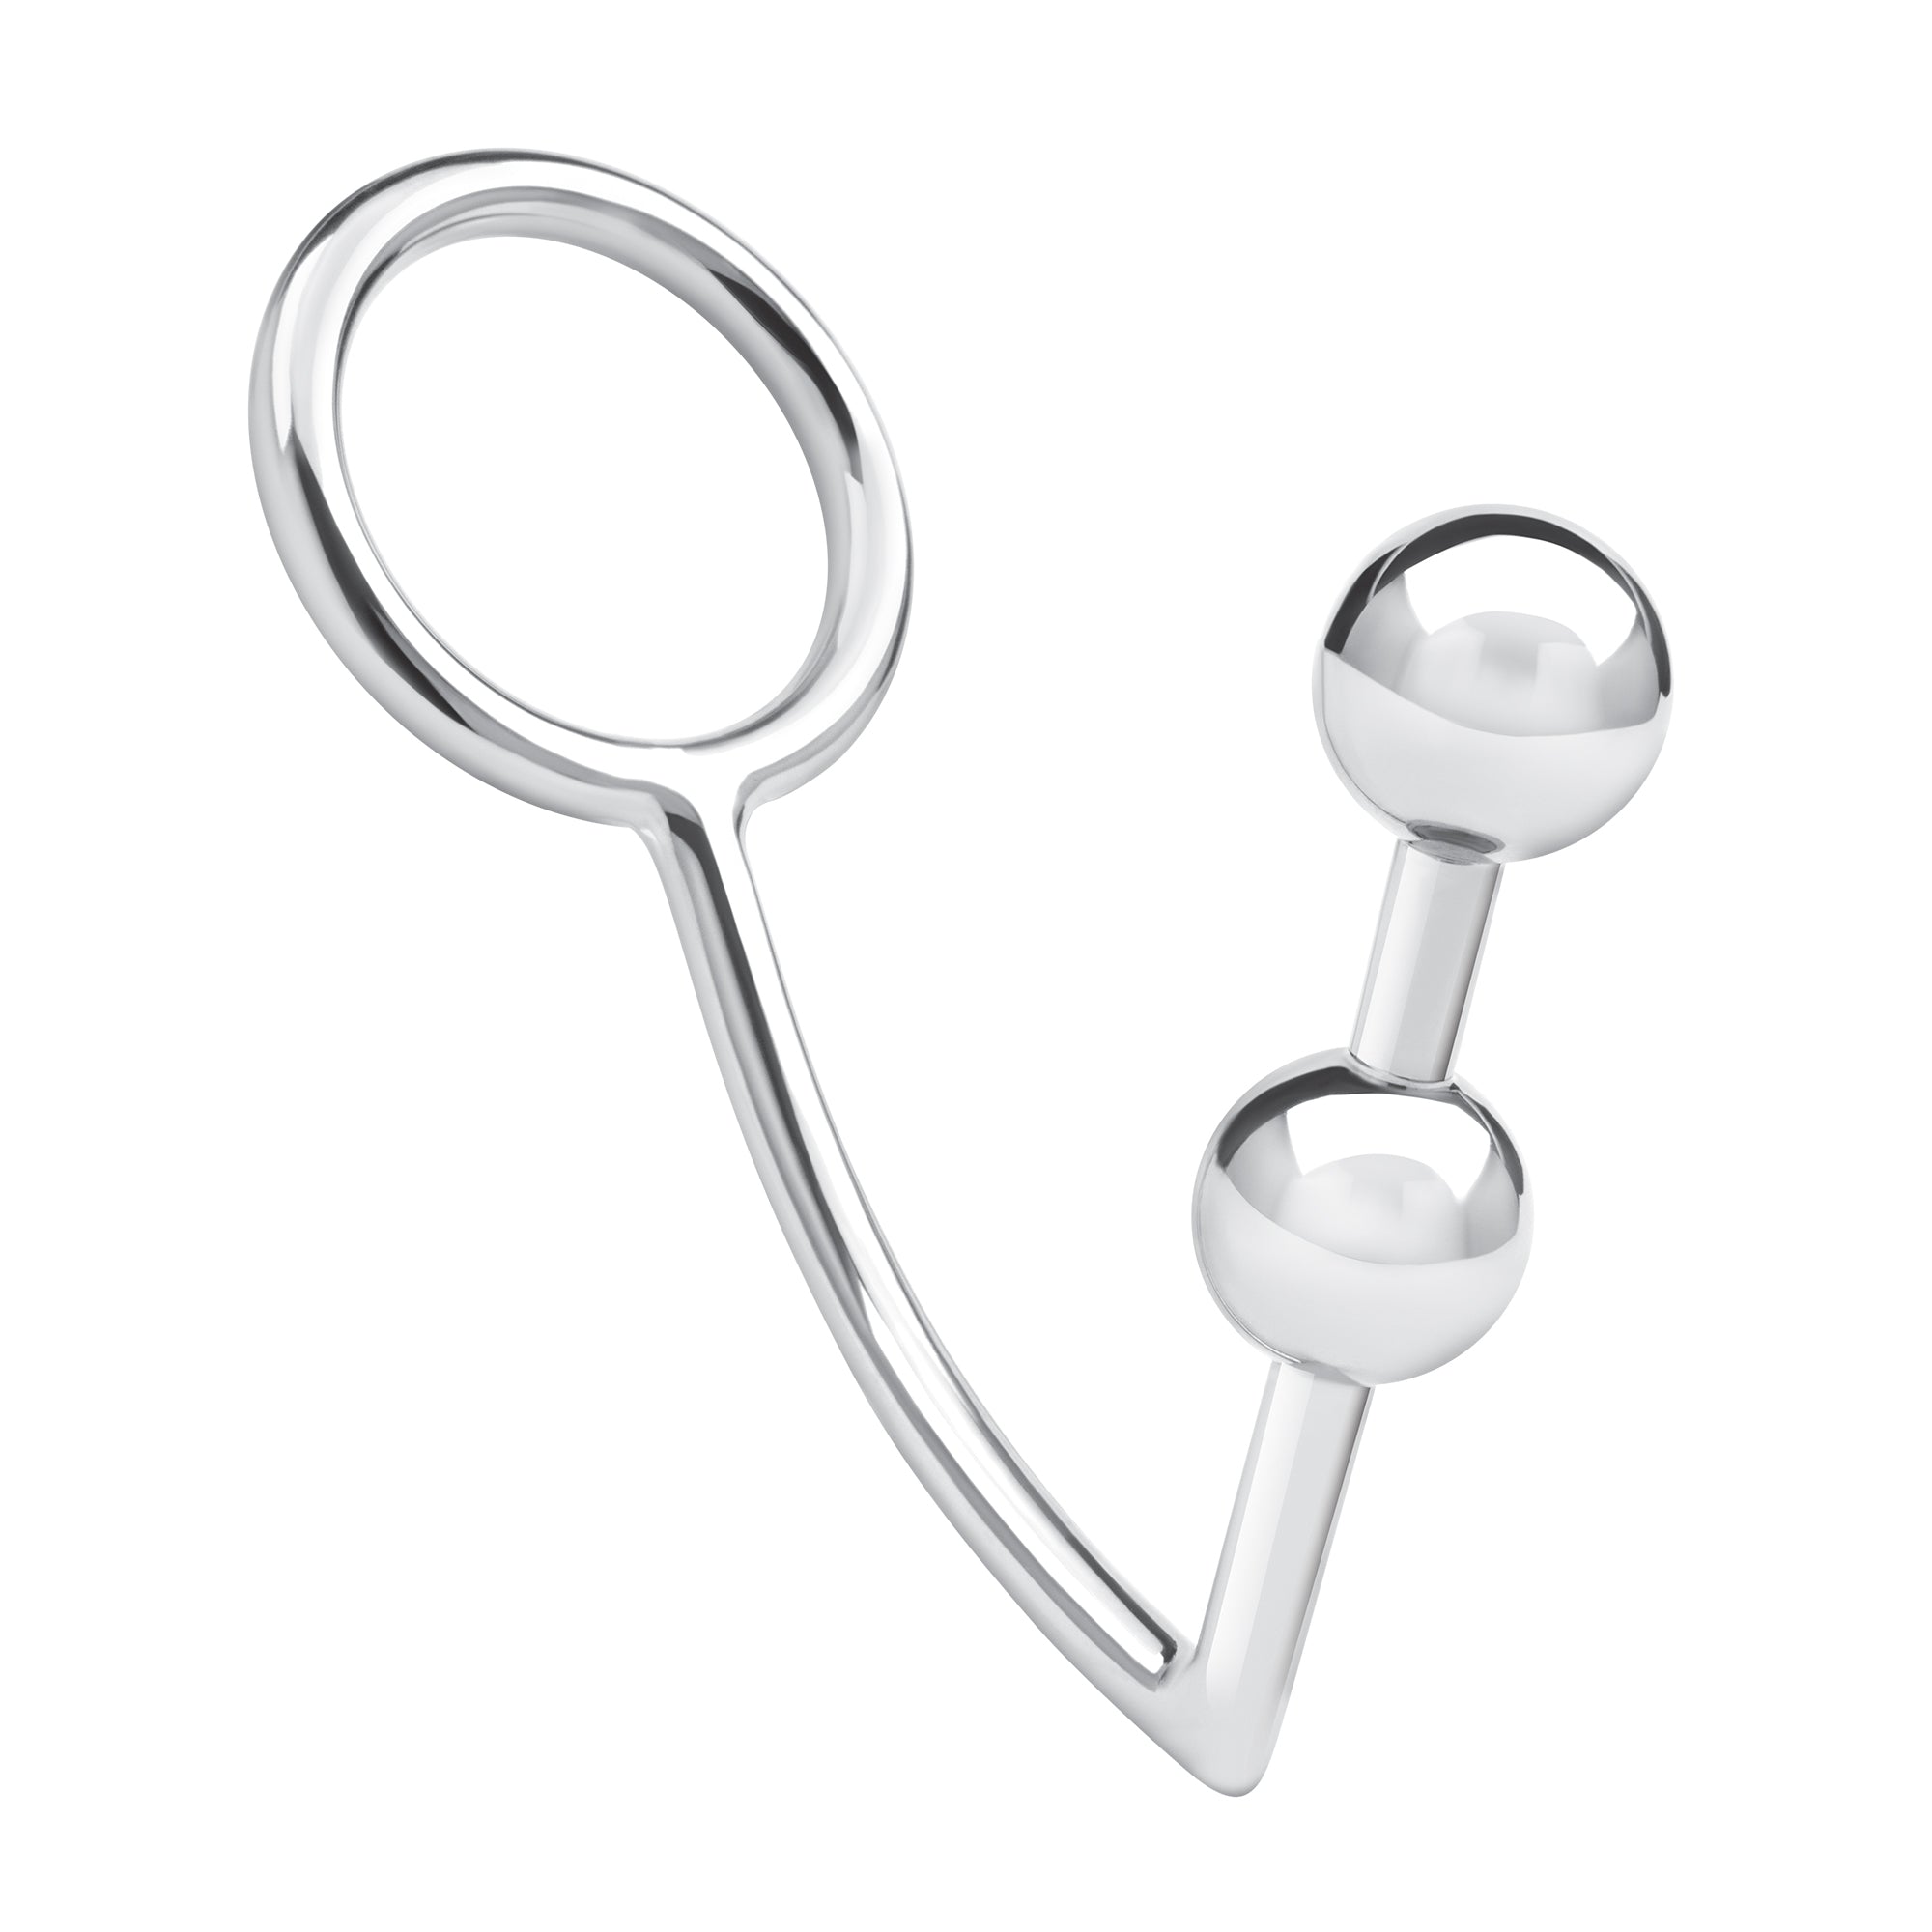 2 Bead Stainless Steel Anal Hook & Cock Ring (45mm)